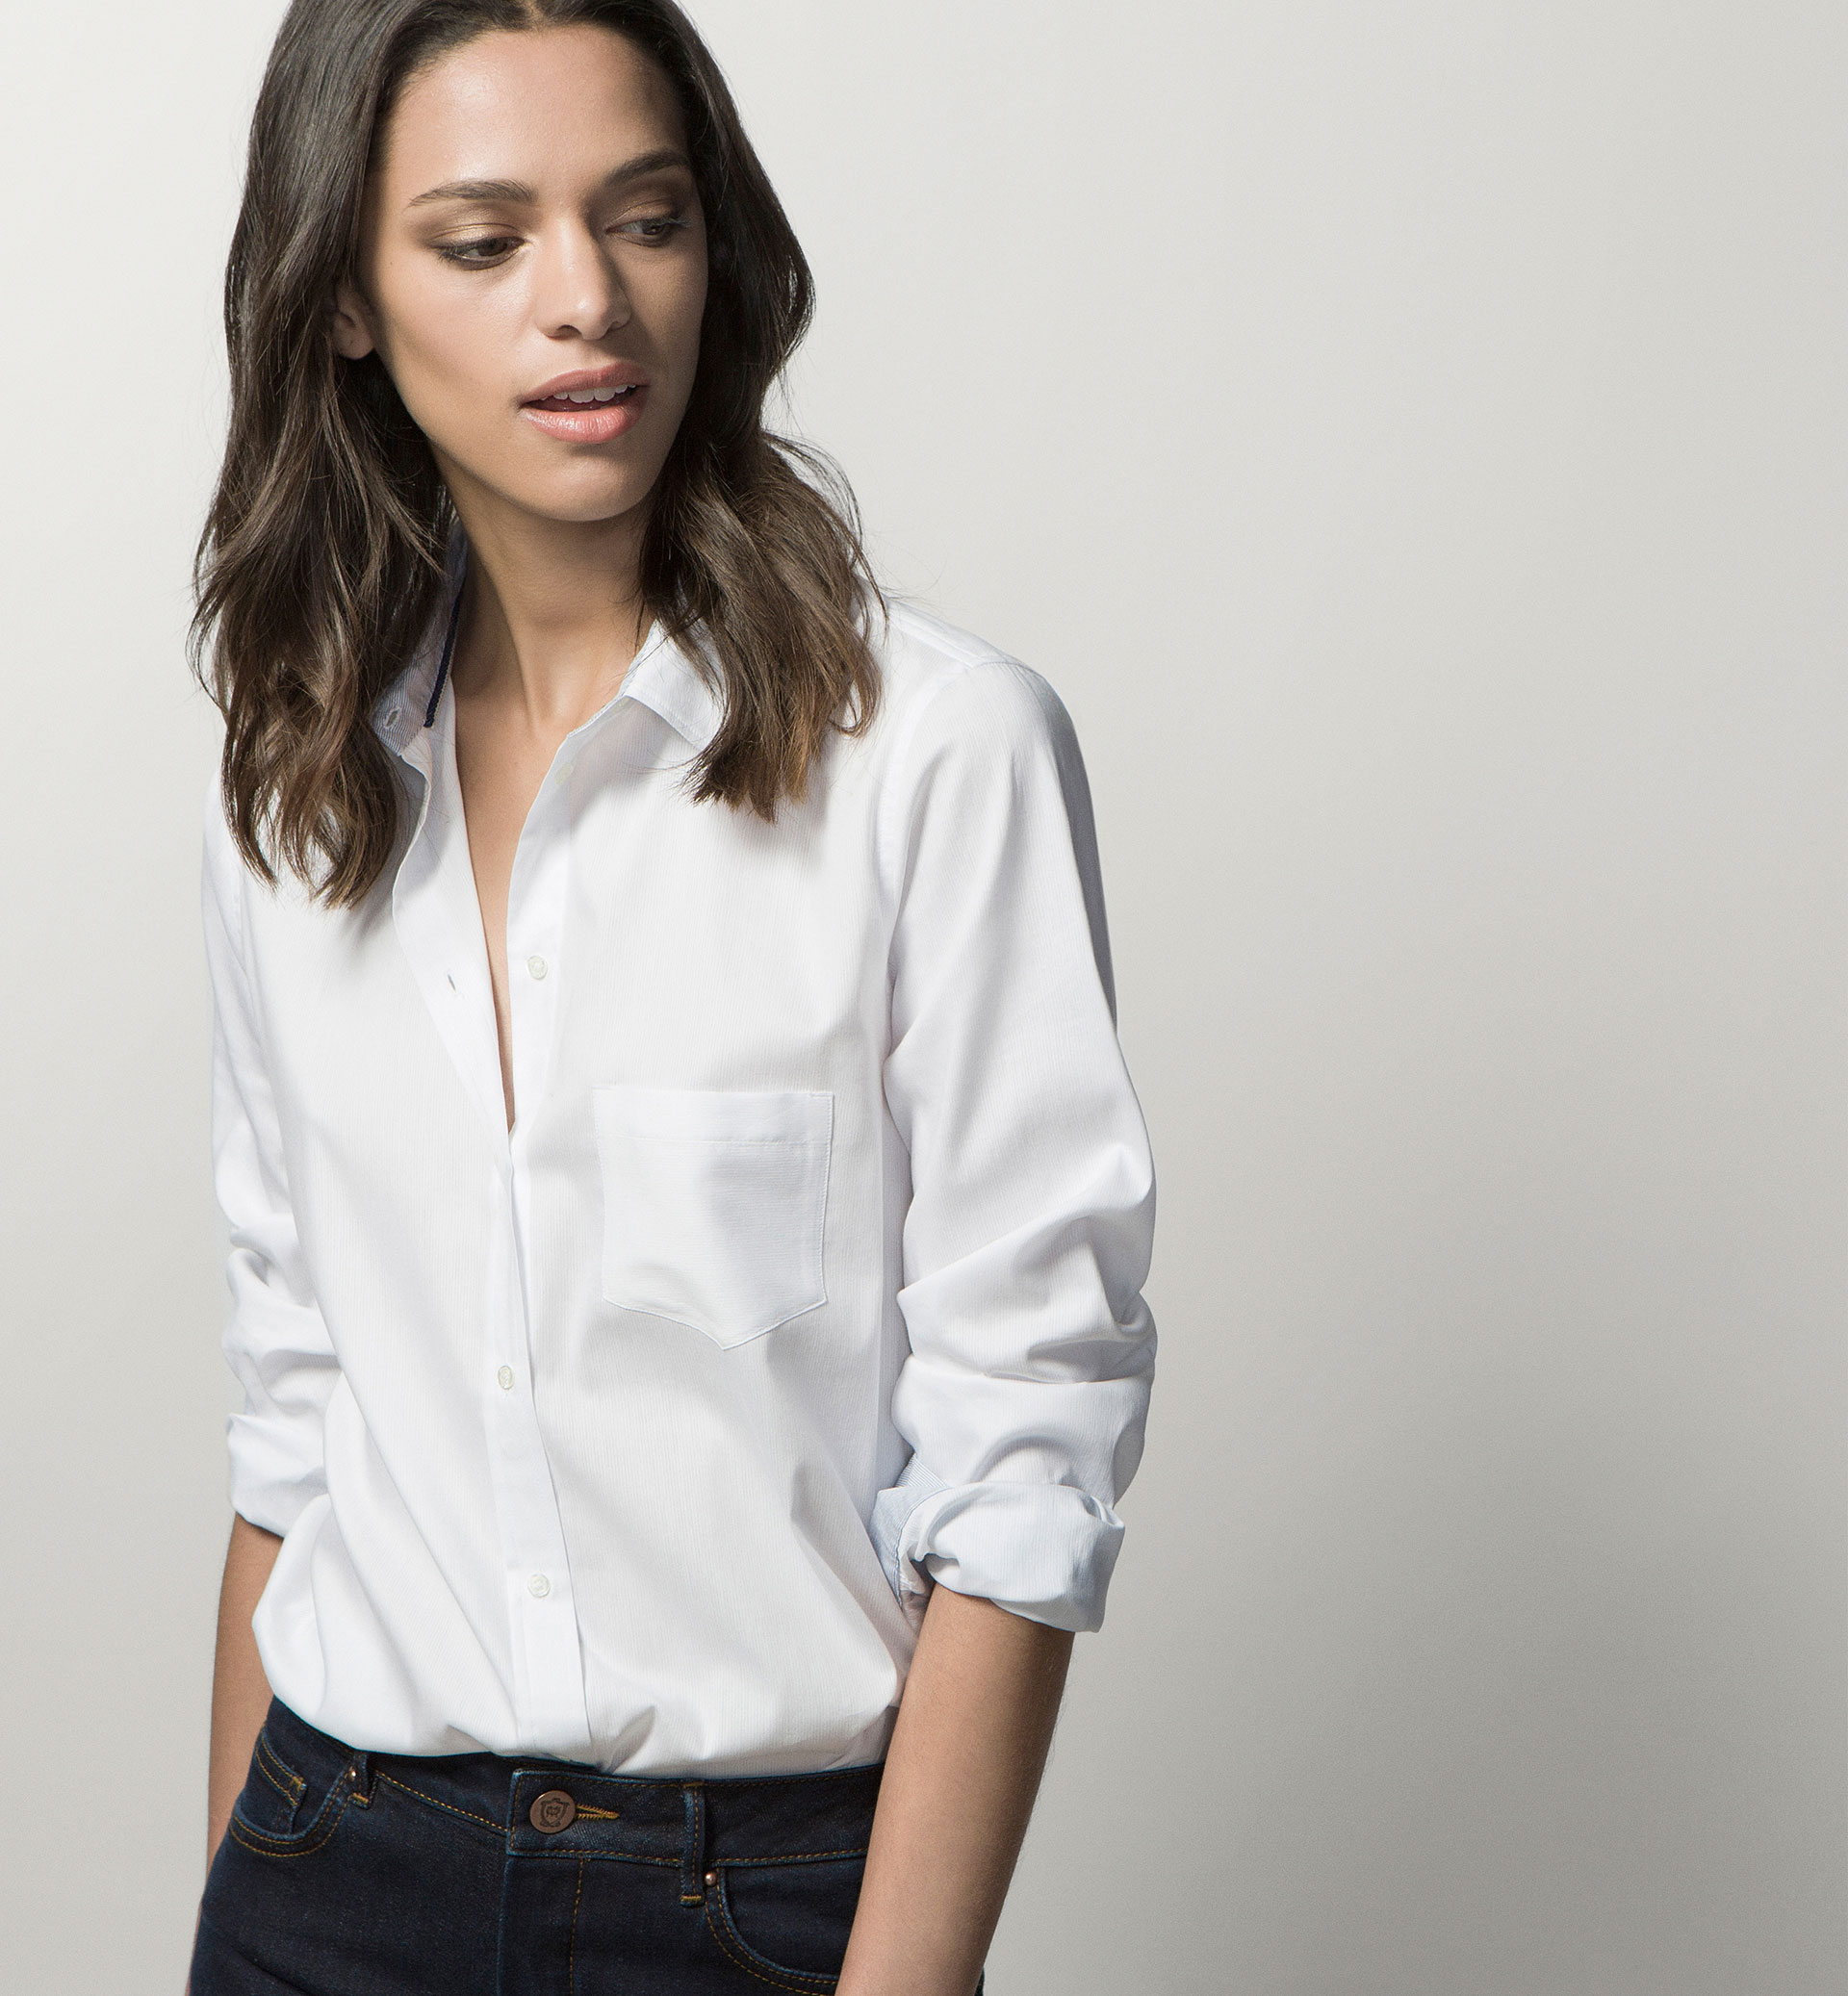 WHITE SHIRT WITH CONTRASTING CUFFS